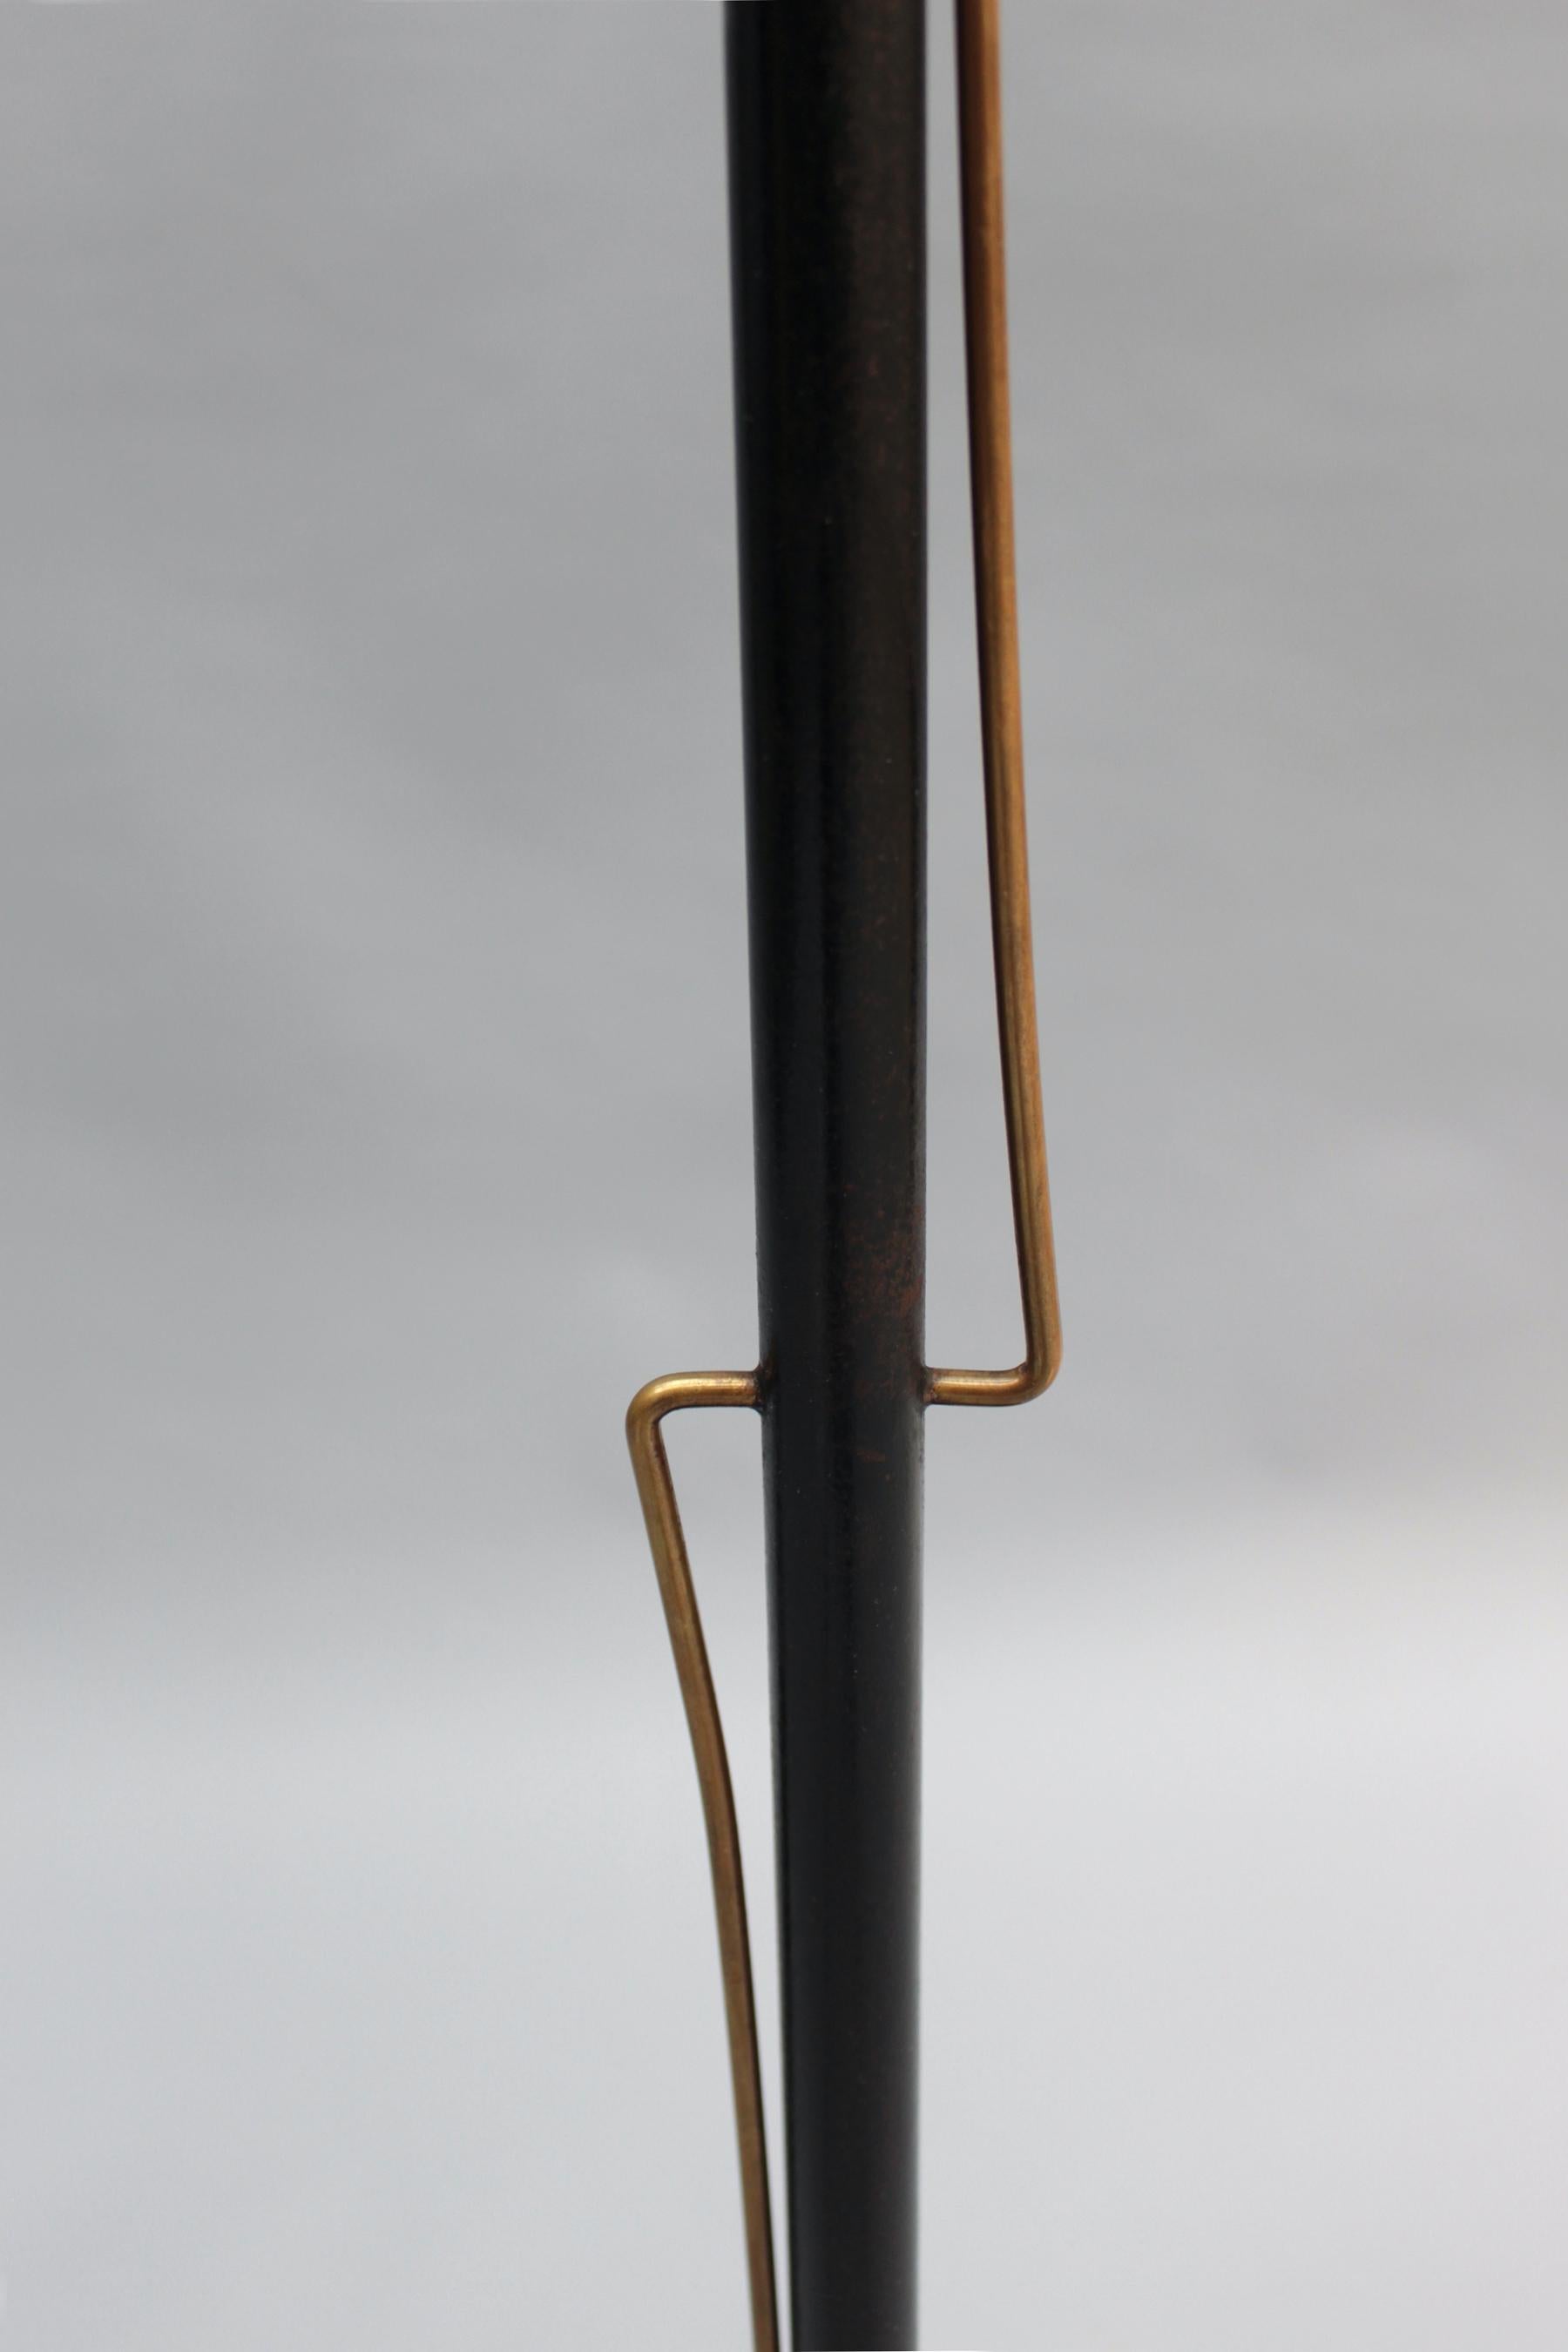 Fine French 1950s Rotating Floor Lamp by Lunel For Sale 9